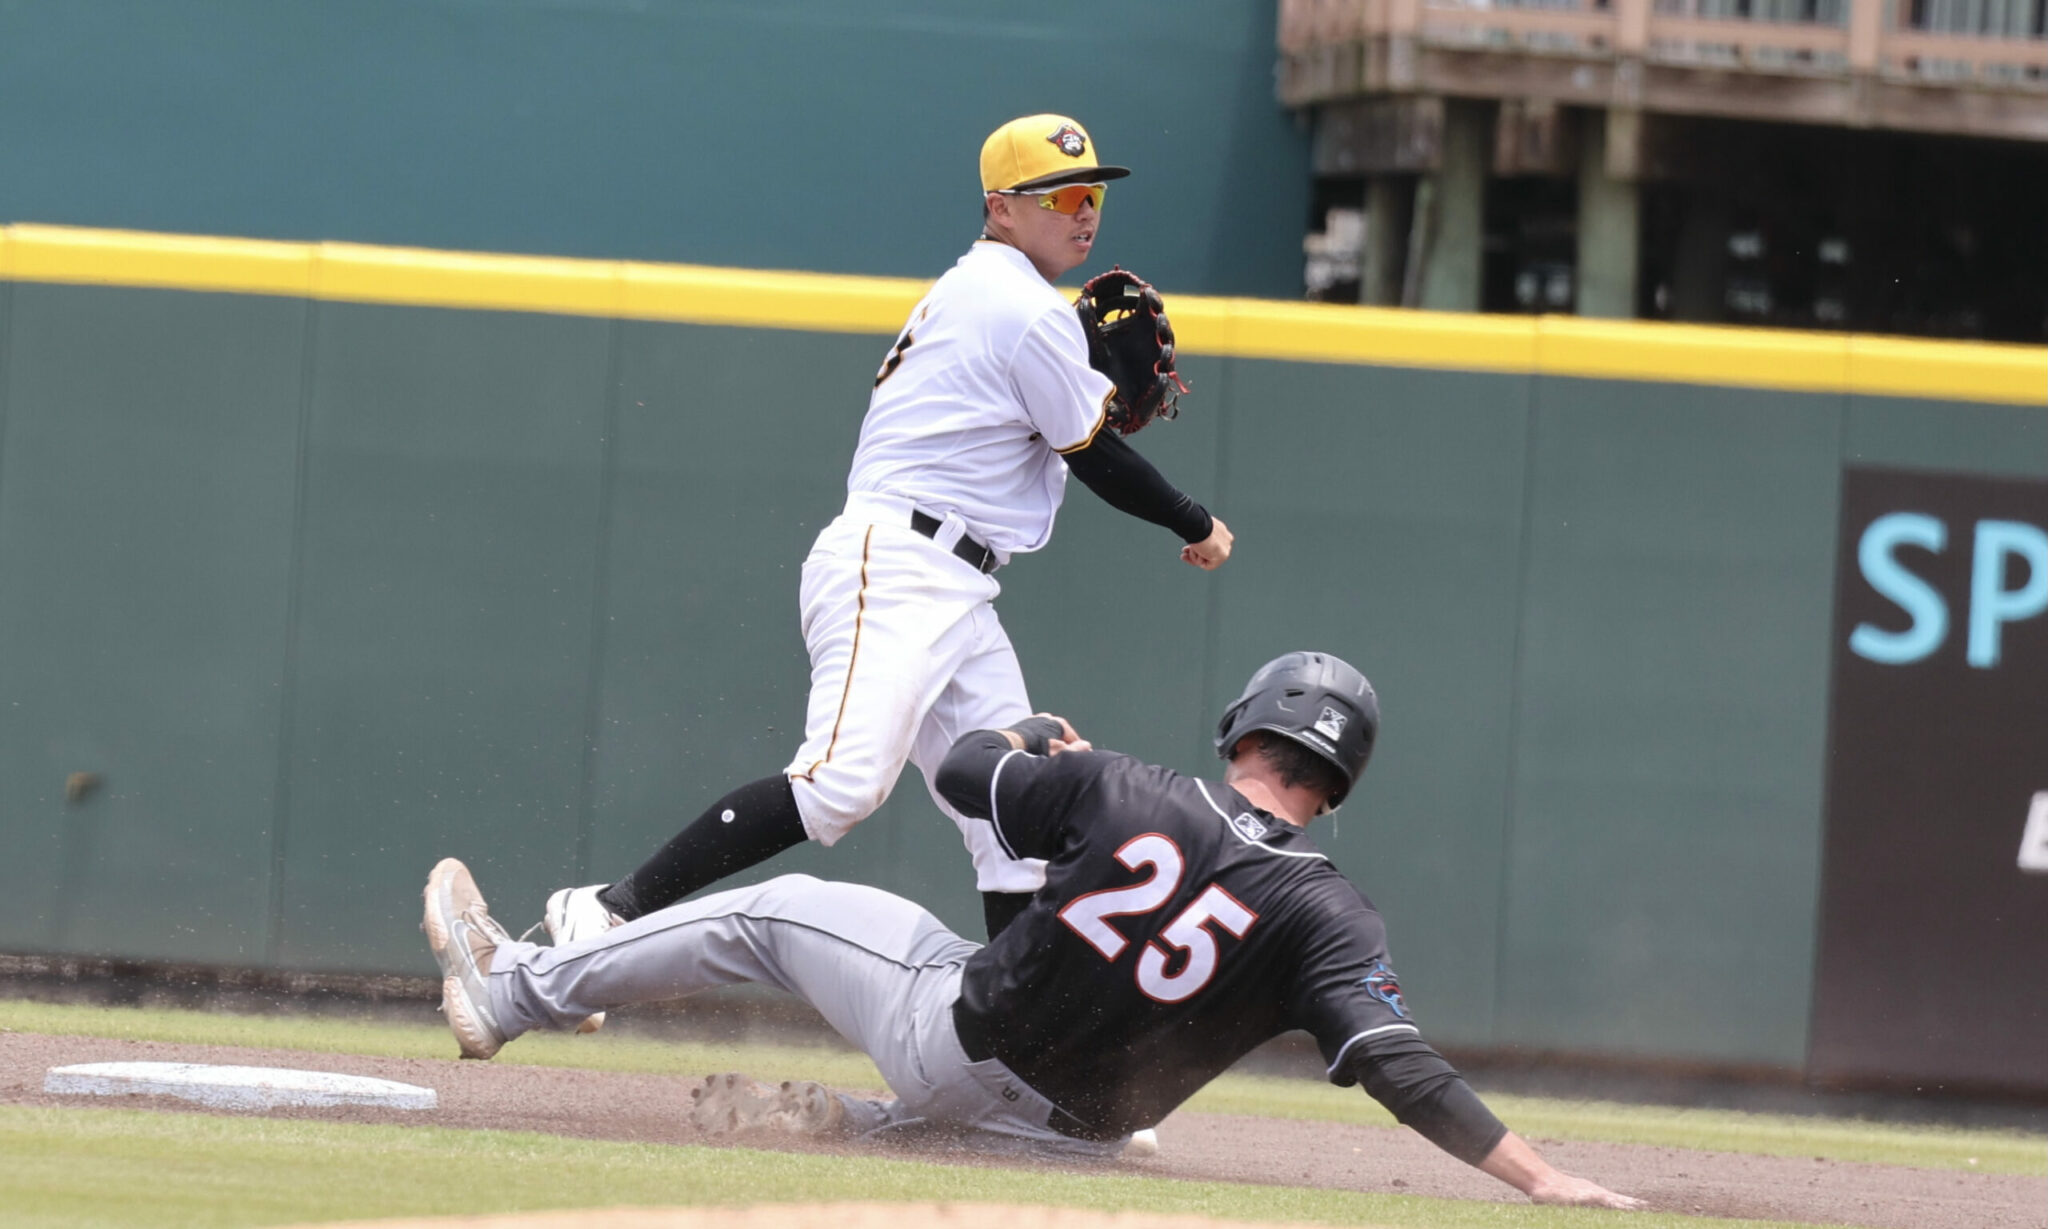 Pirates Prospects Player of the Week: Tsung-Che Cheng